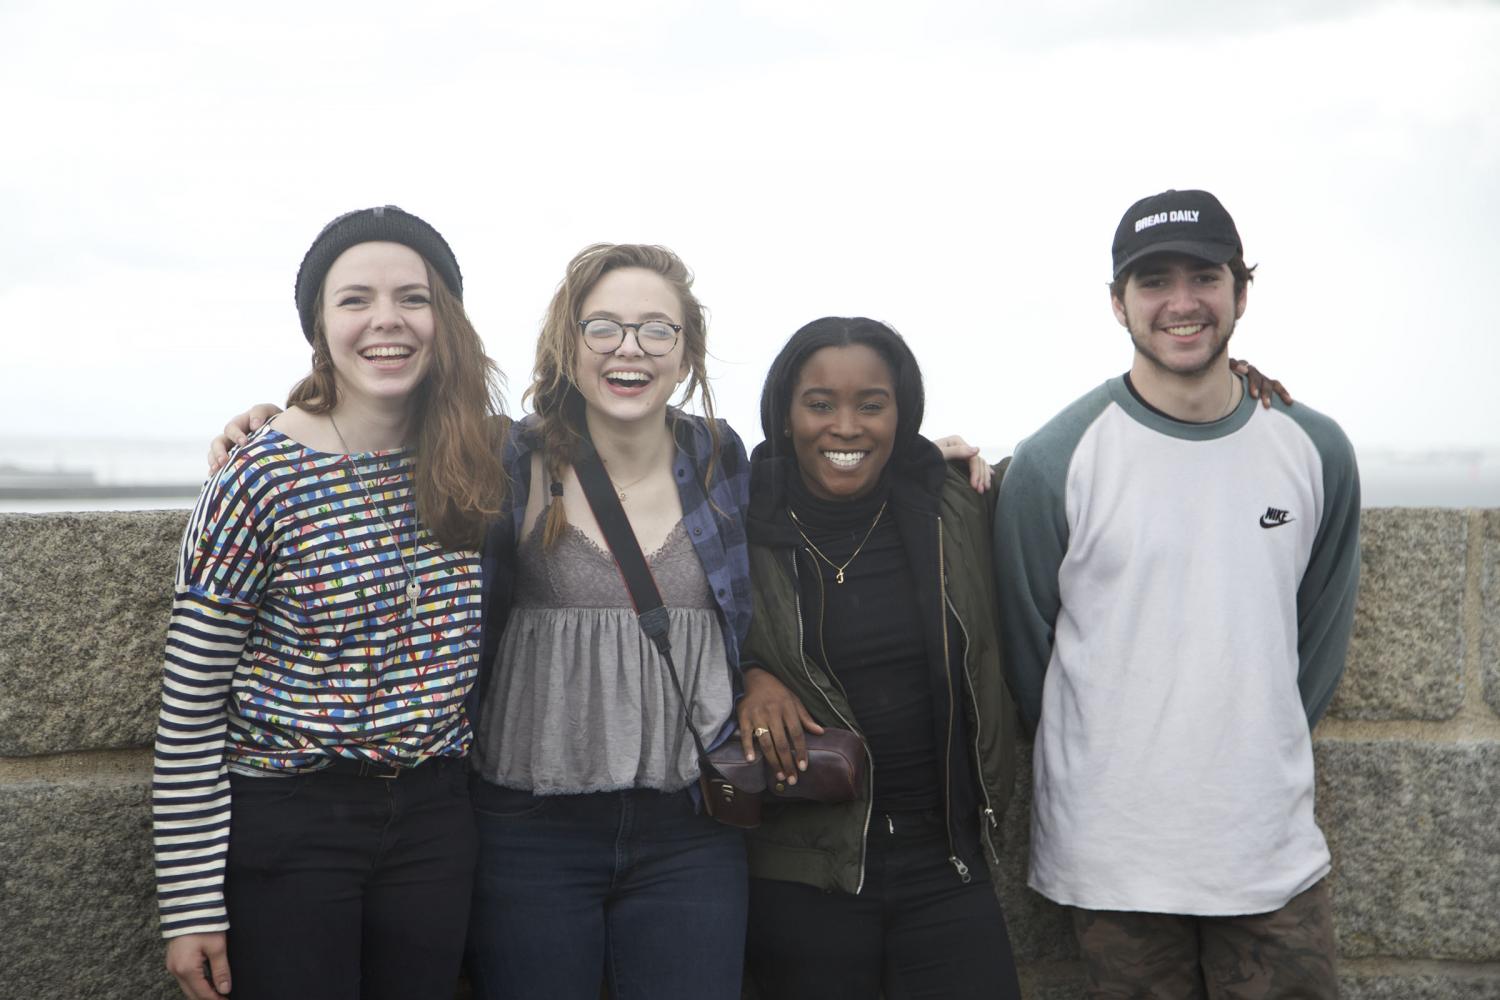 Pictured left to right: Senior photojournalism major Chloe Jakiela, Junior Journalism major Emily
Bennett, alum Jacqueline Roberts and incoming freshman Trevor Marnich pose on the top of
the James Joyce tower in Dublin, Ireland for Michael Chester, president of the Press Photographers
Association of Ireland.